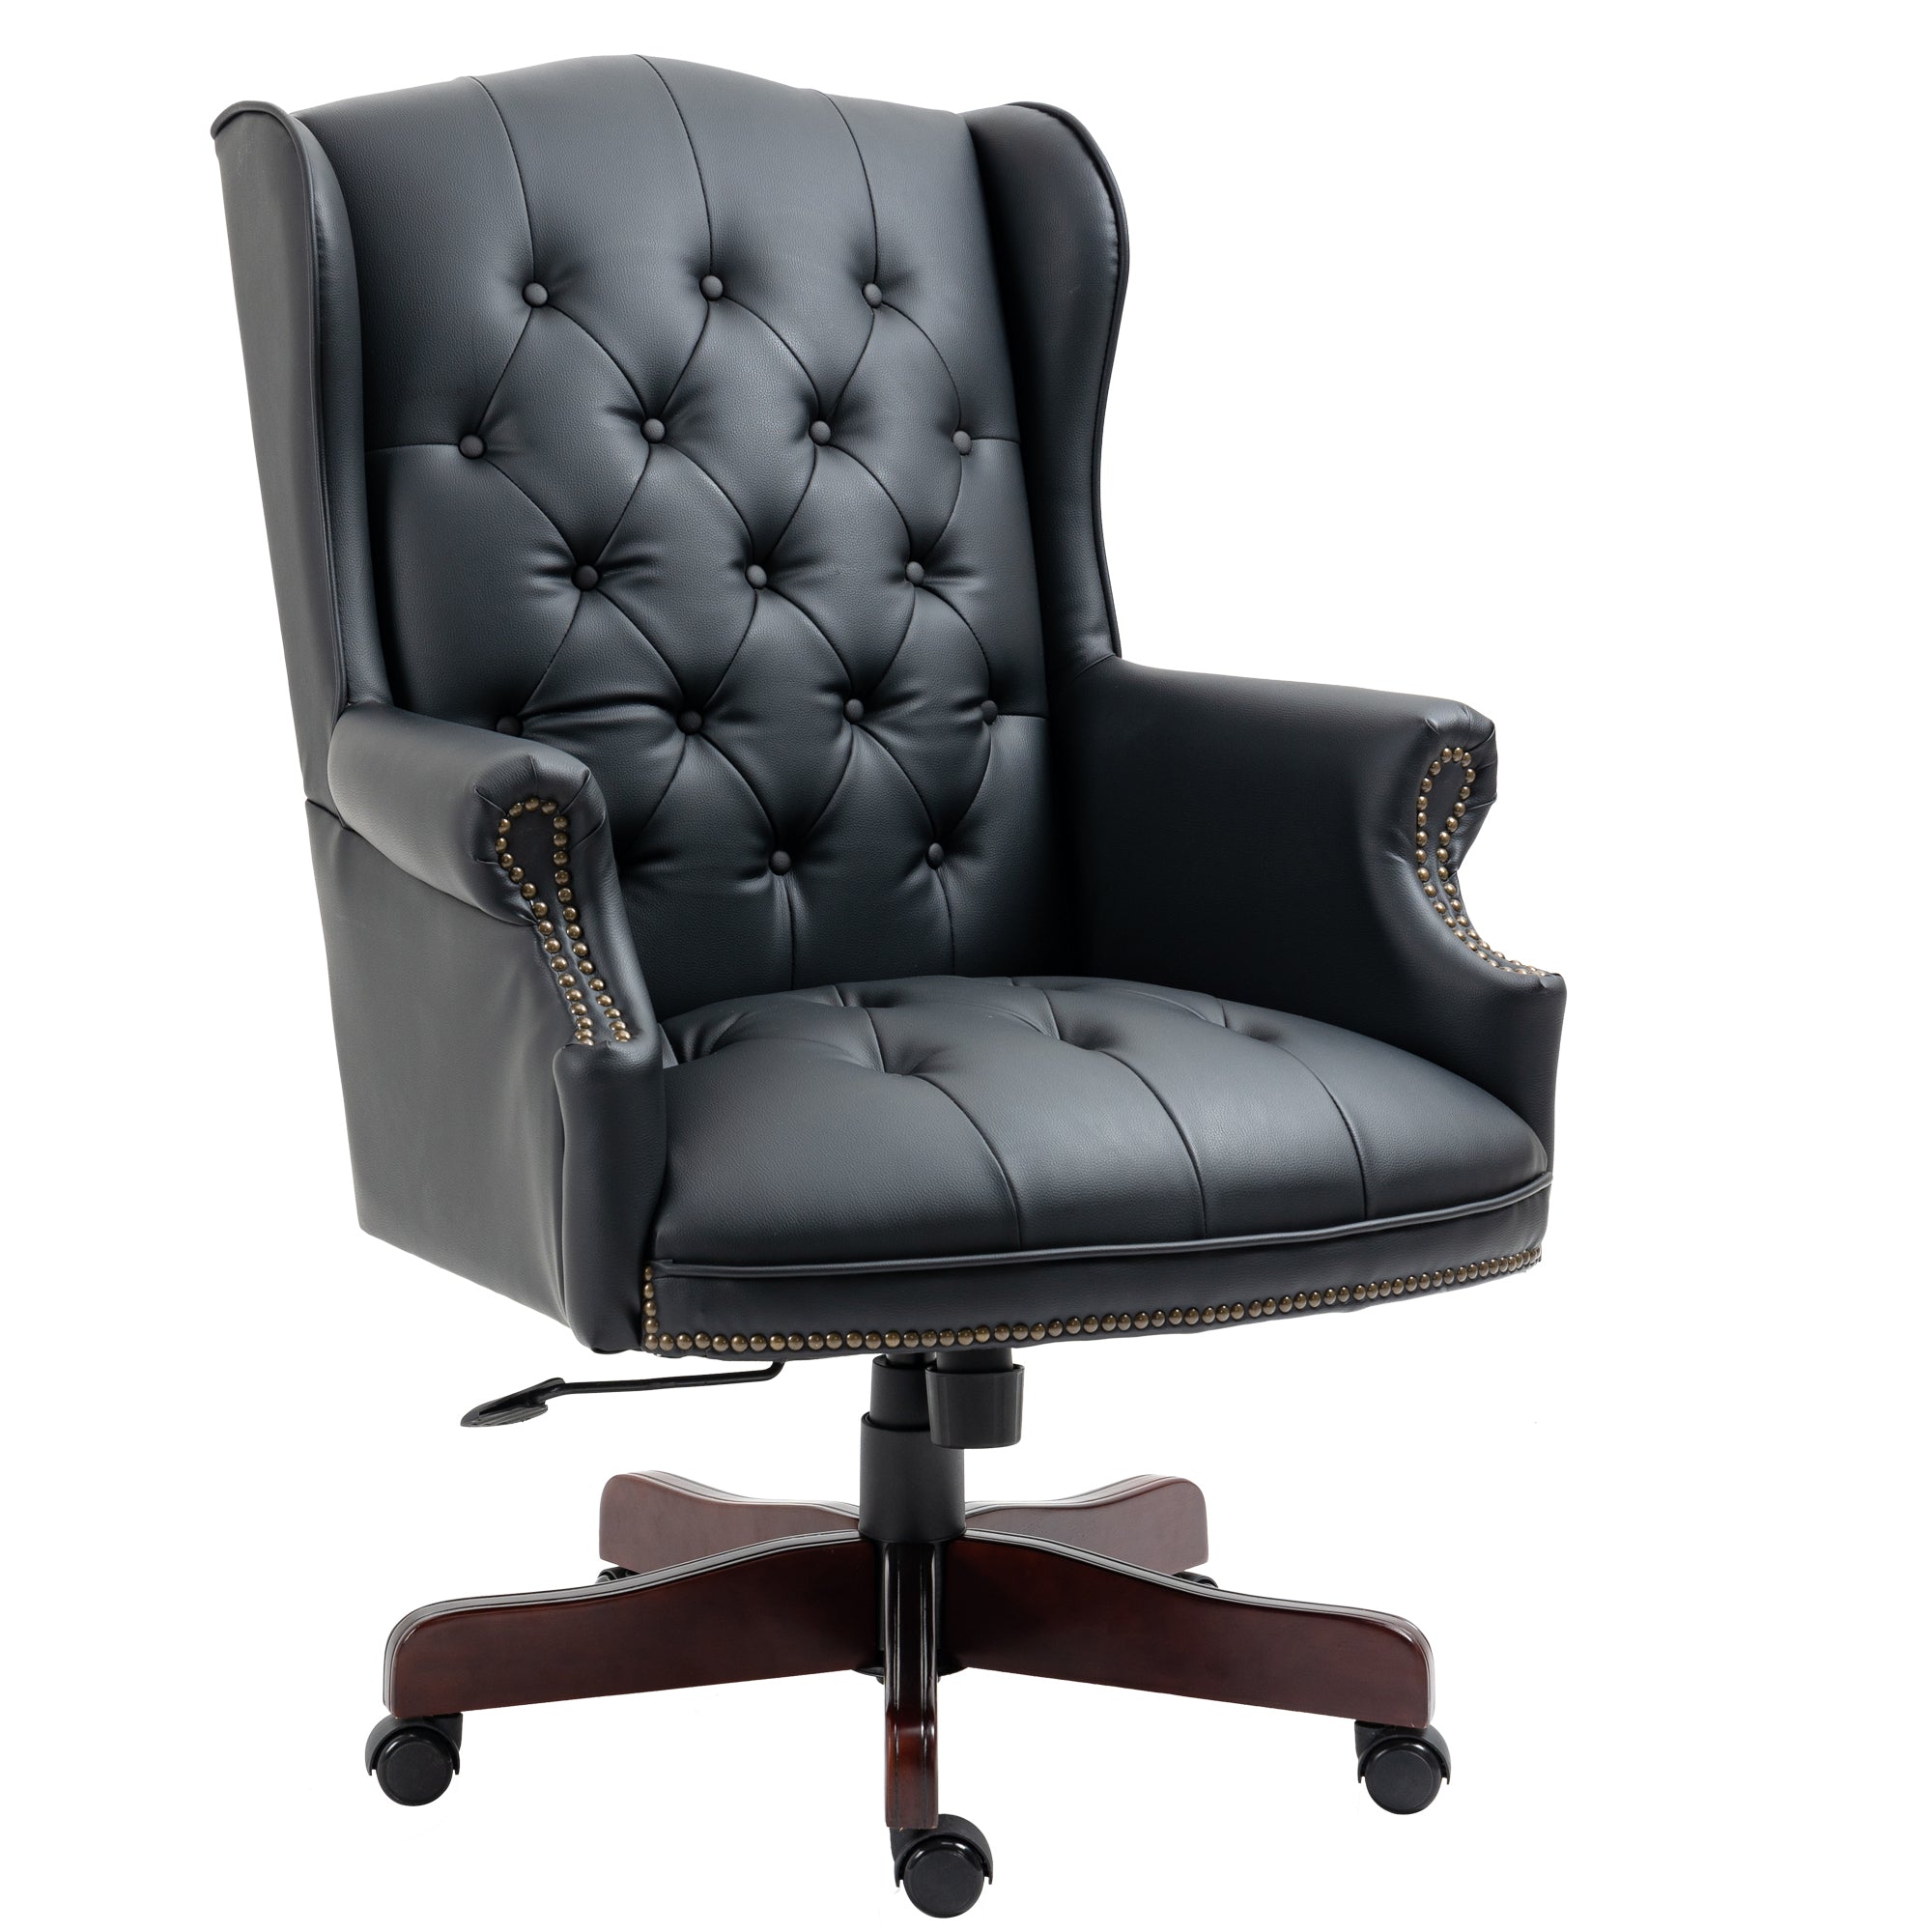 Executive Office Chair - High Back Reclining Comfortable Desk Chair - Ergonomic Design - Thick Padded Seat and Backrest - PU Leather Desk Chair with Smooth Glide Caster Wheels - Black